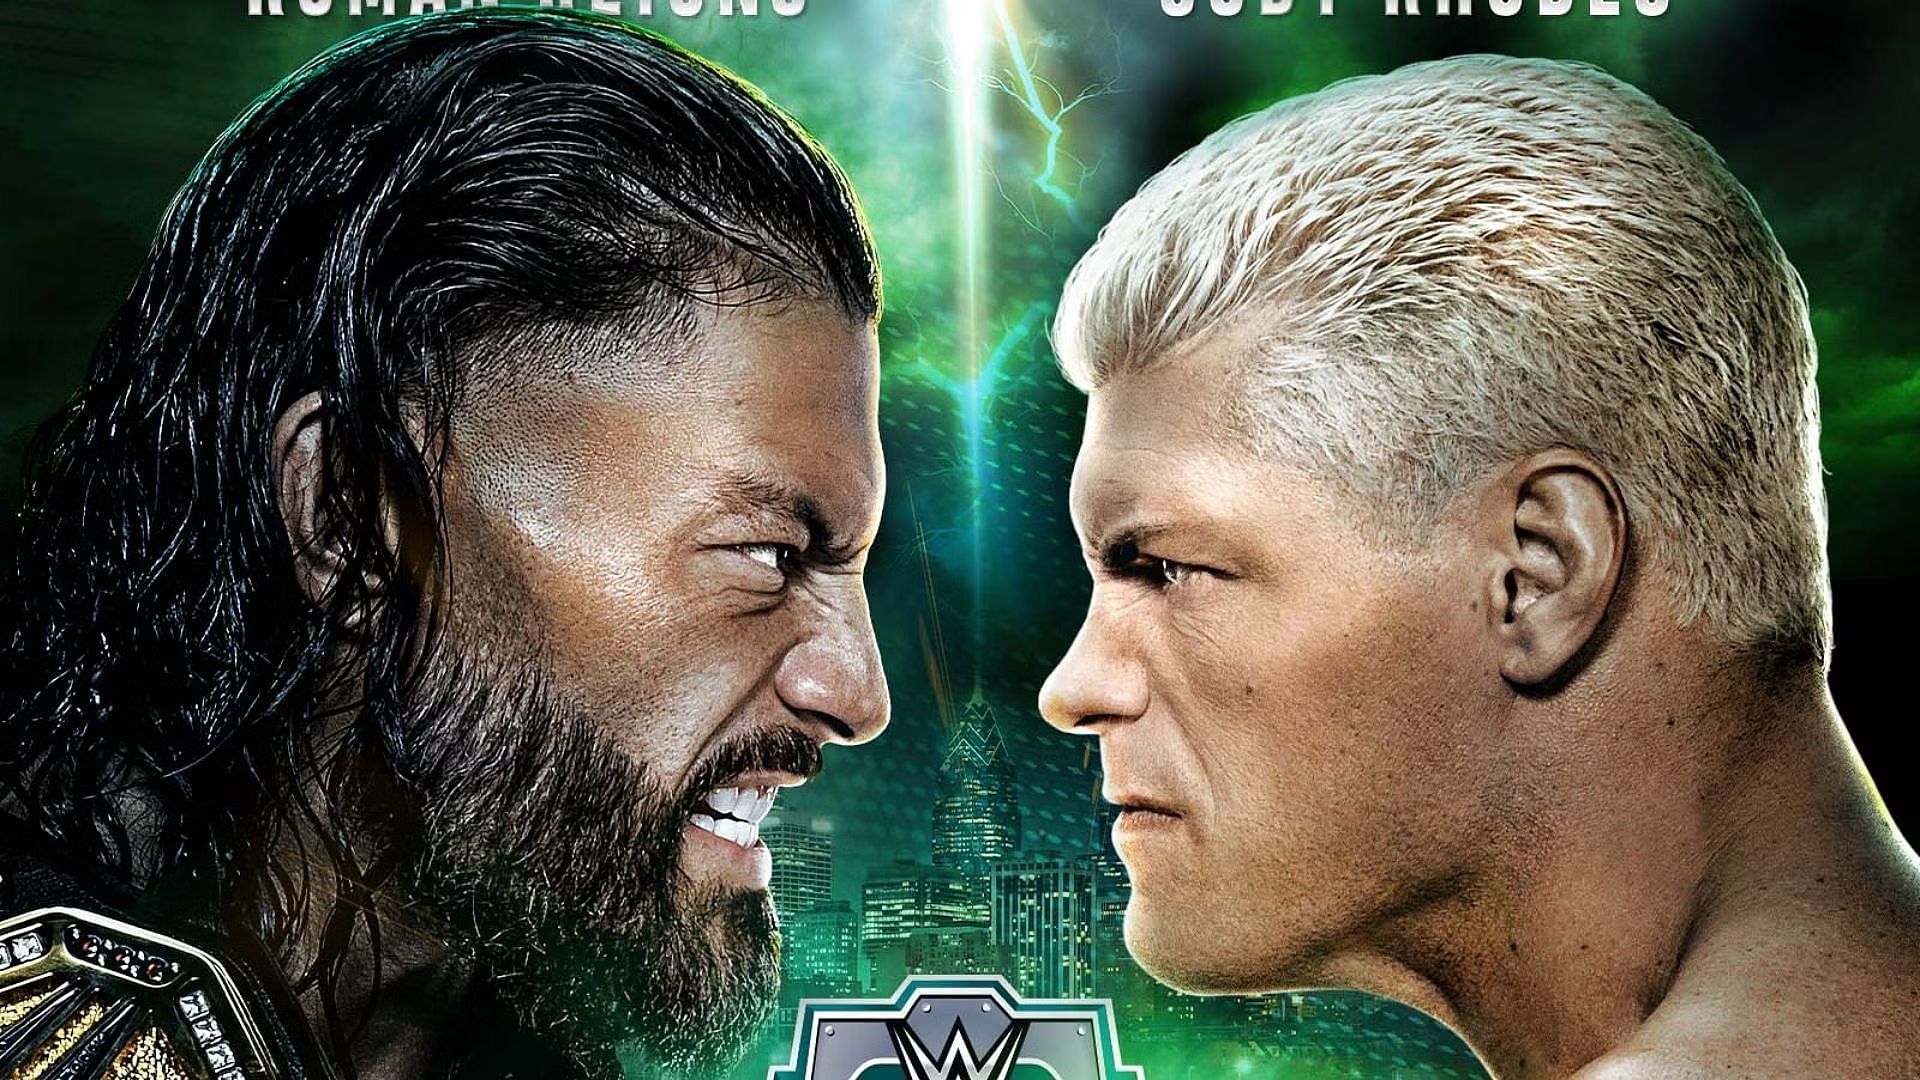 Roman Reigns will defend his WWE title against Cody Rhodes at WrestleMania 40.